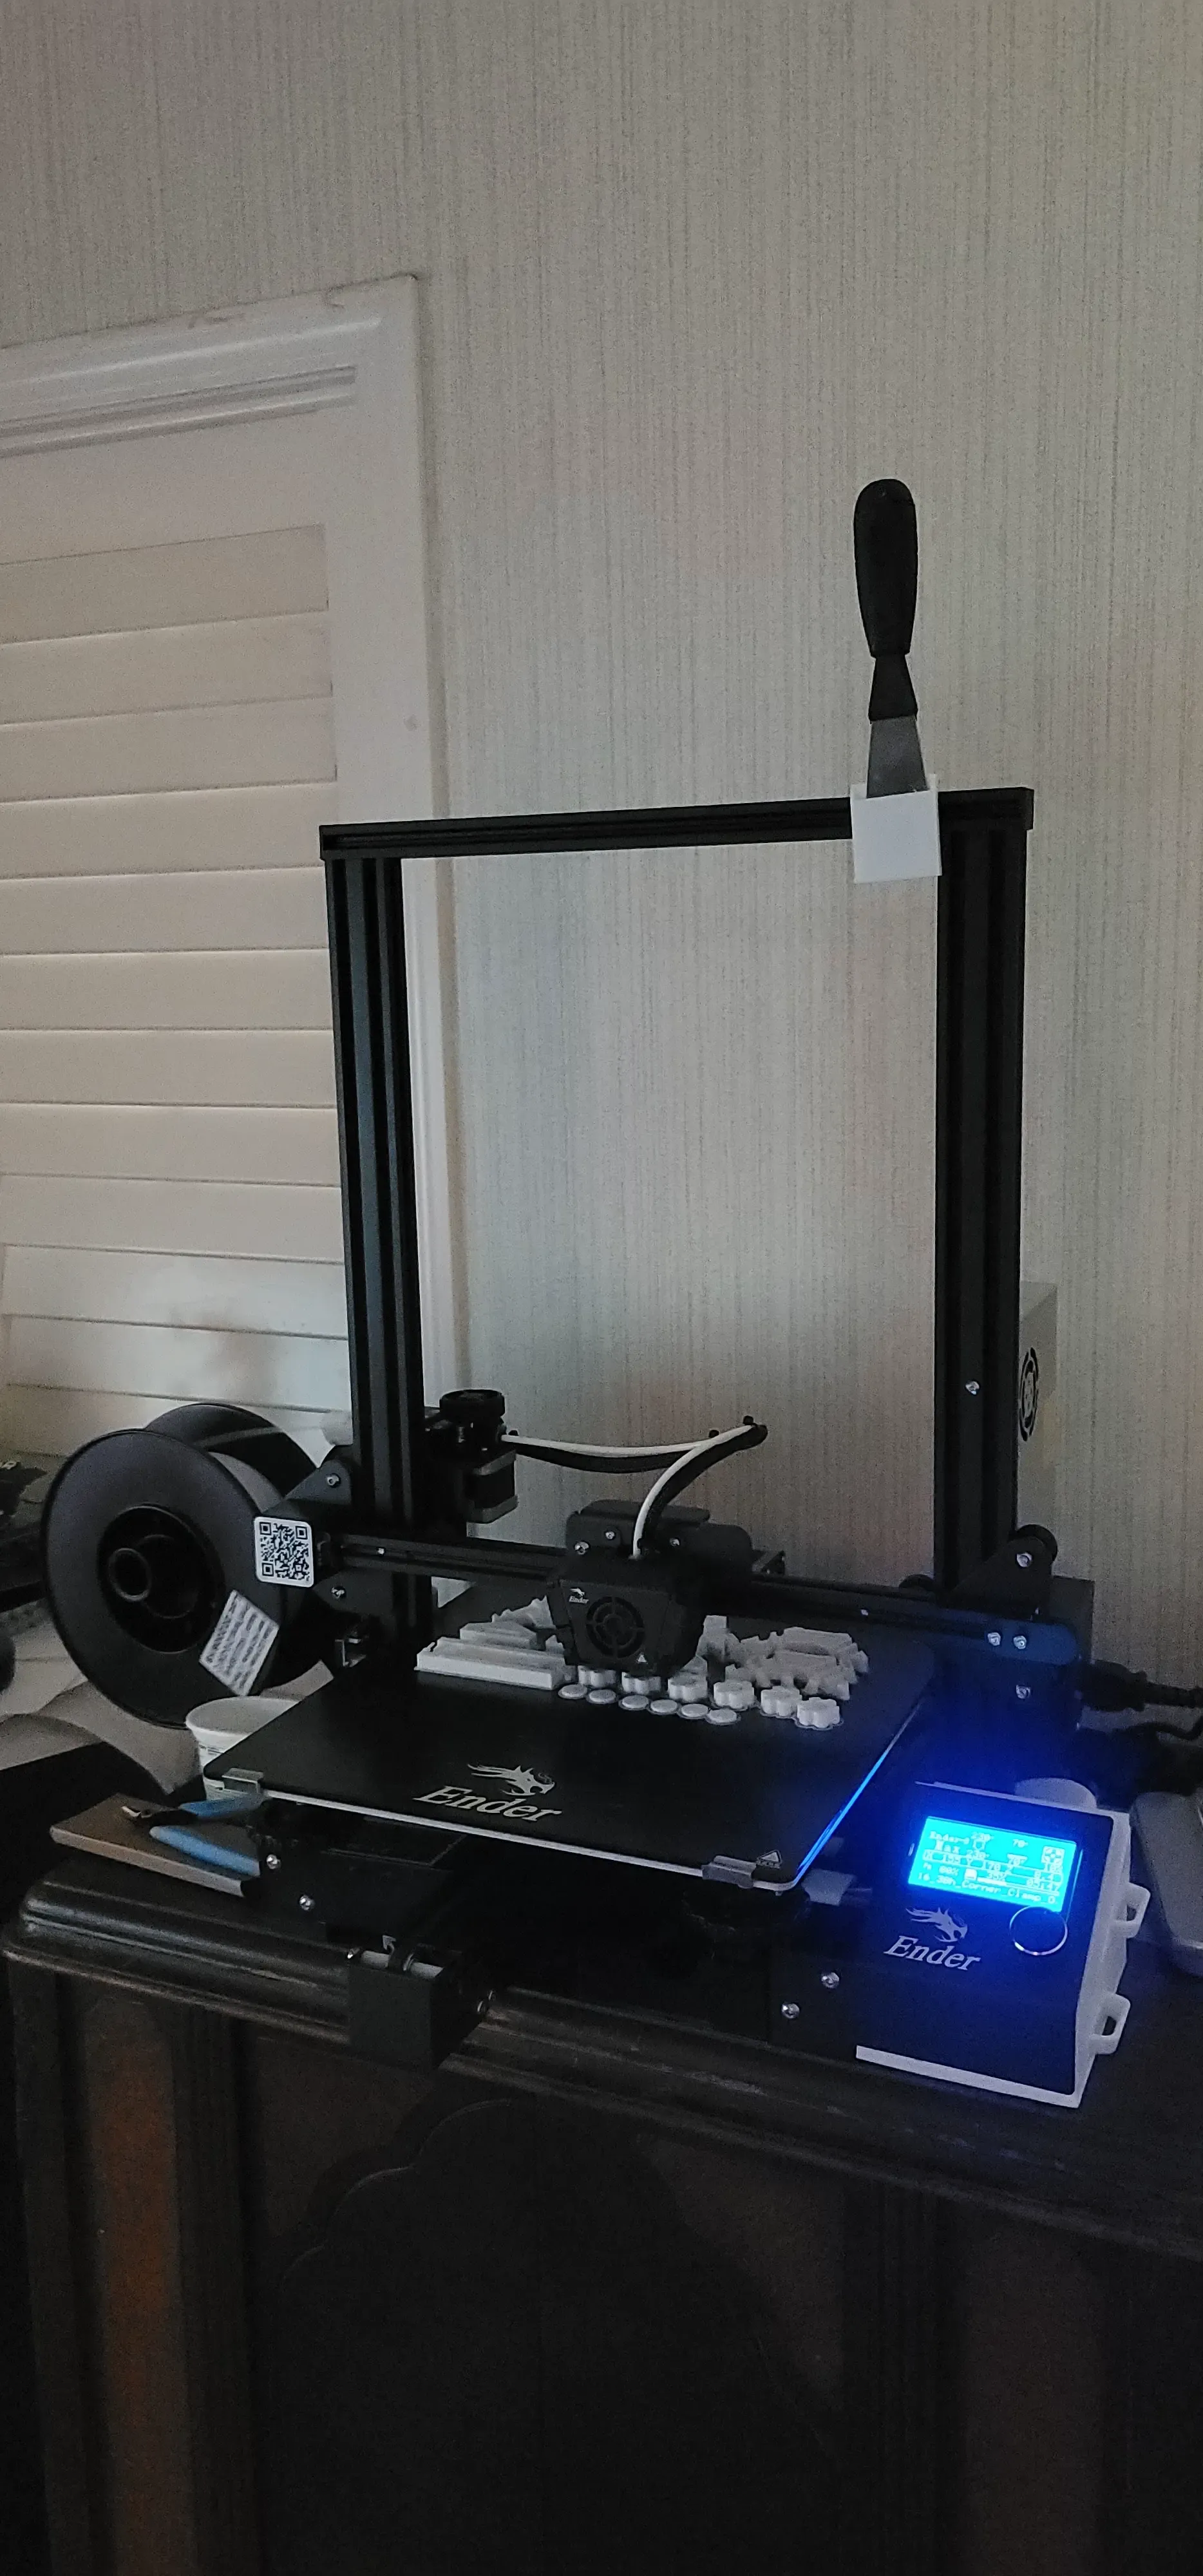 Stand Fan by Creality Cloud remixed for Ender 3 Max